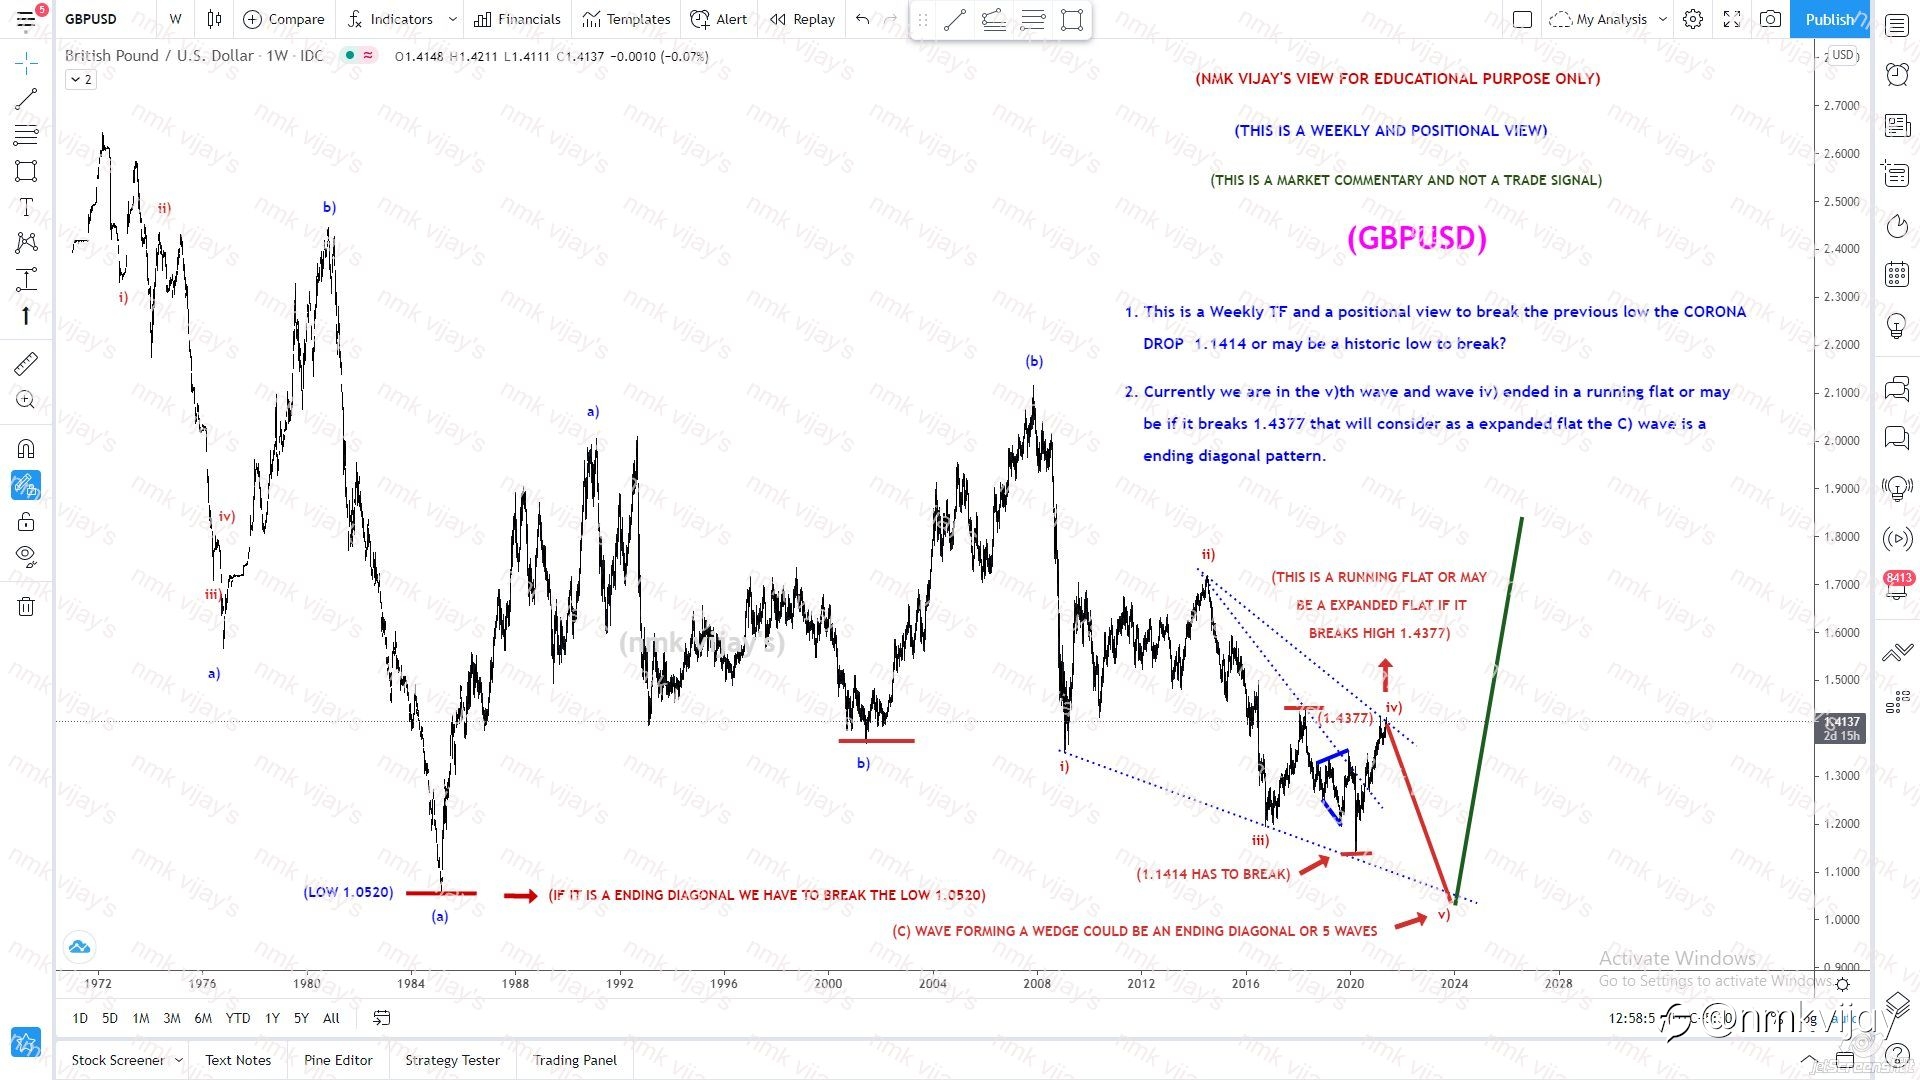 GBPUSD-Weekly TF analysis and understand where we are now and possibilities i mentioned..